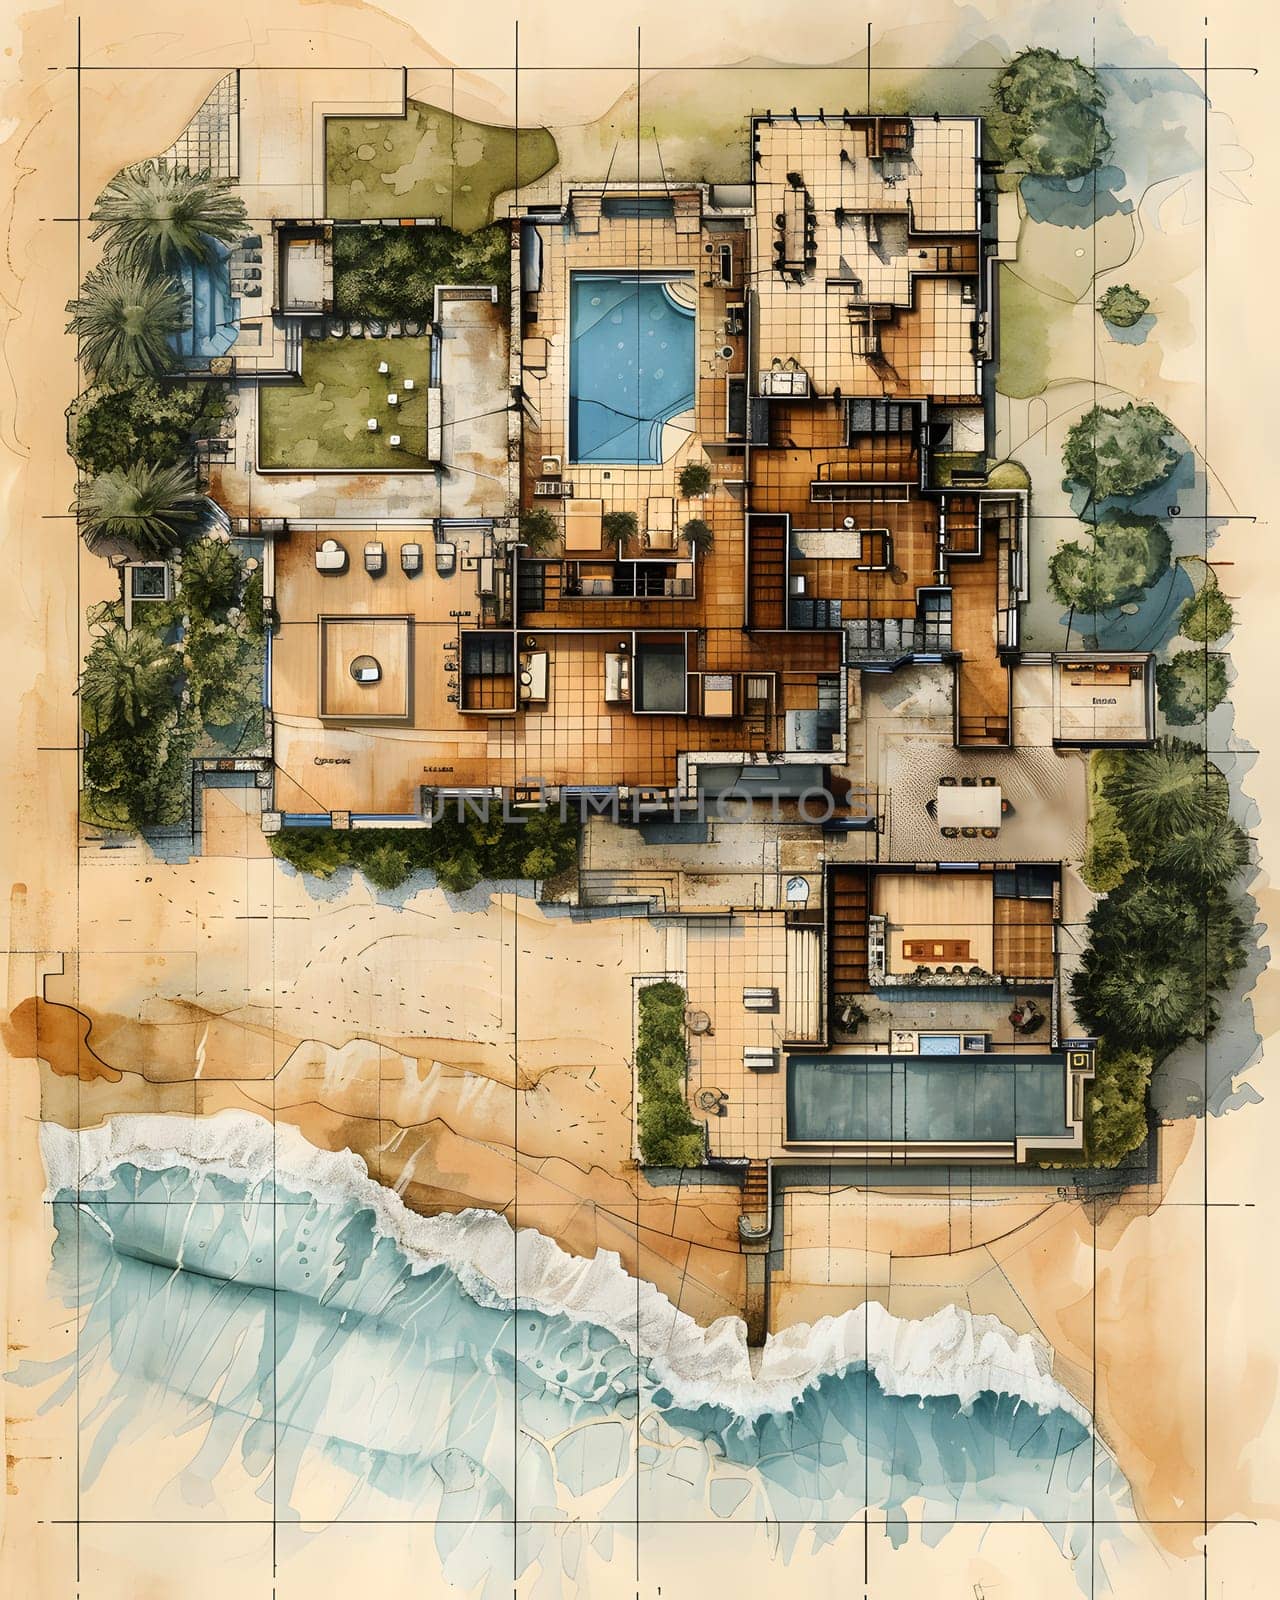 An urban design painting of a beachfront house in a rectangle format by Nadtochiy